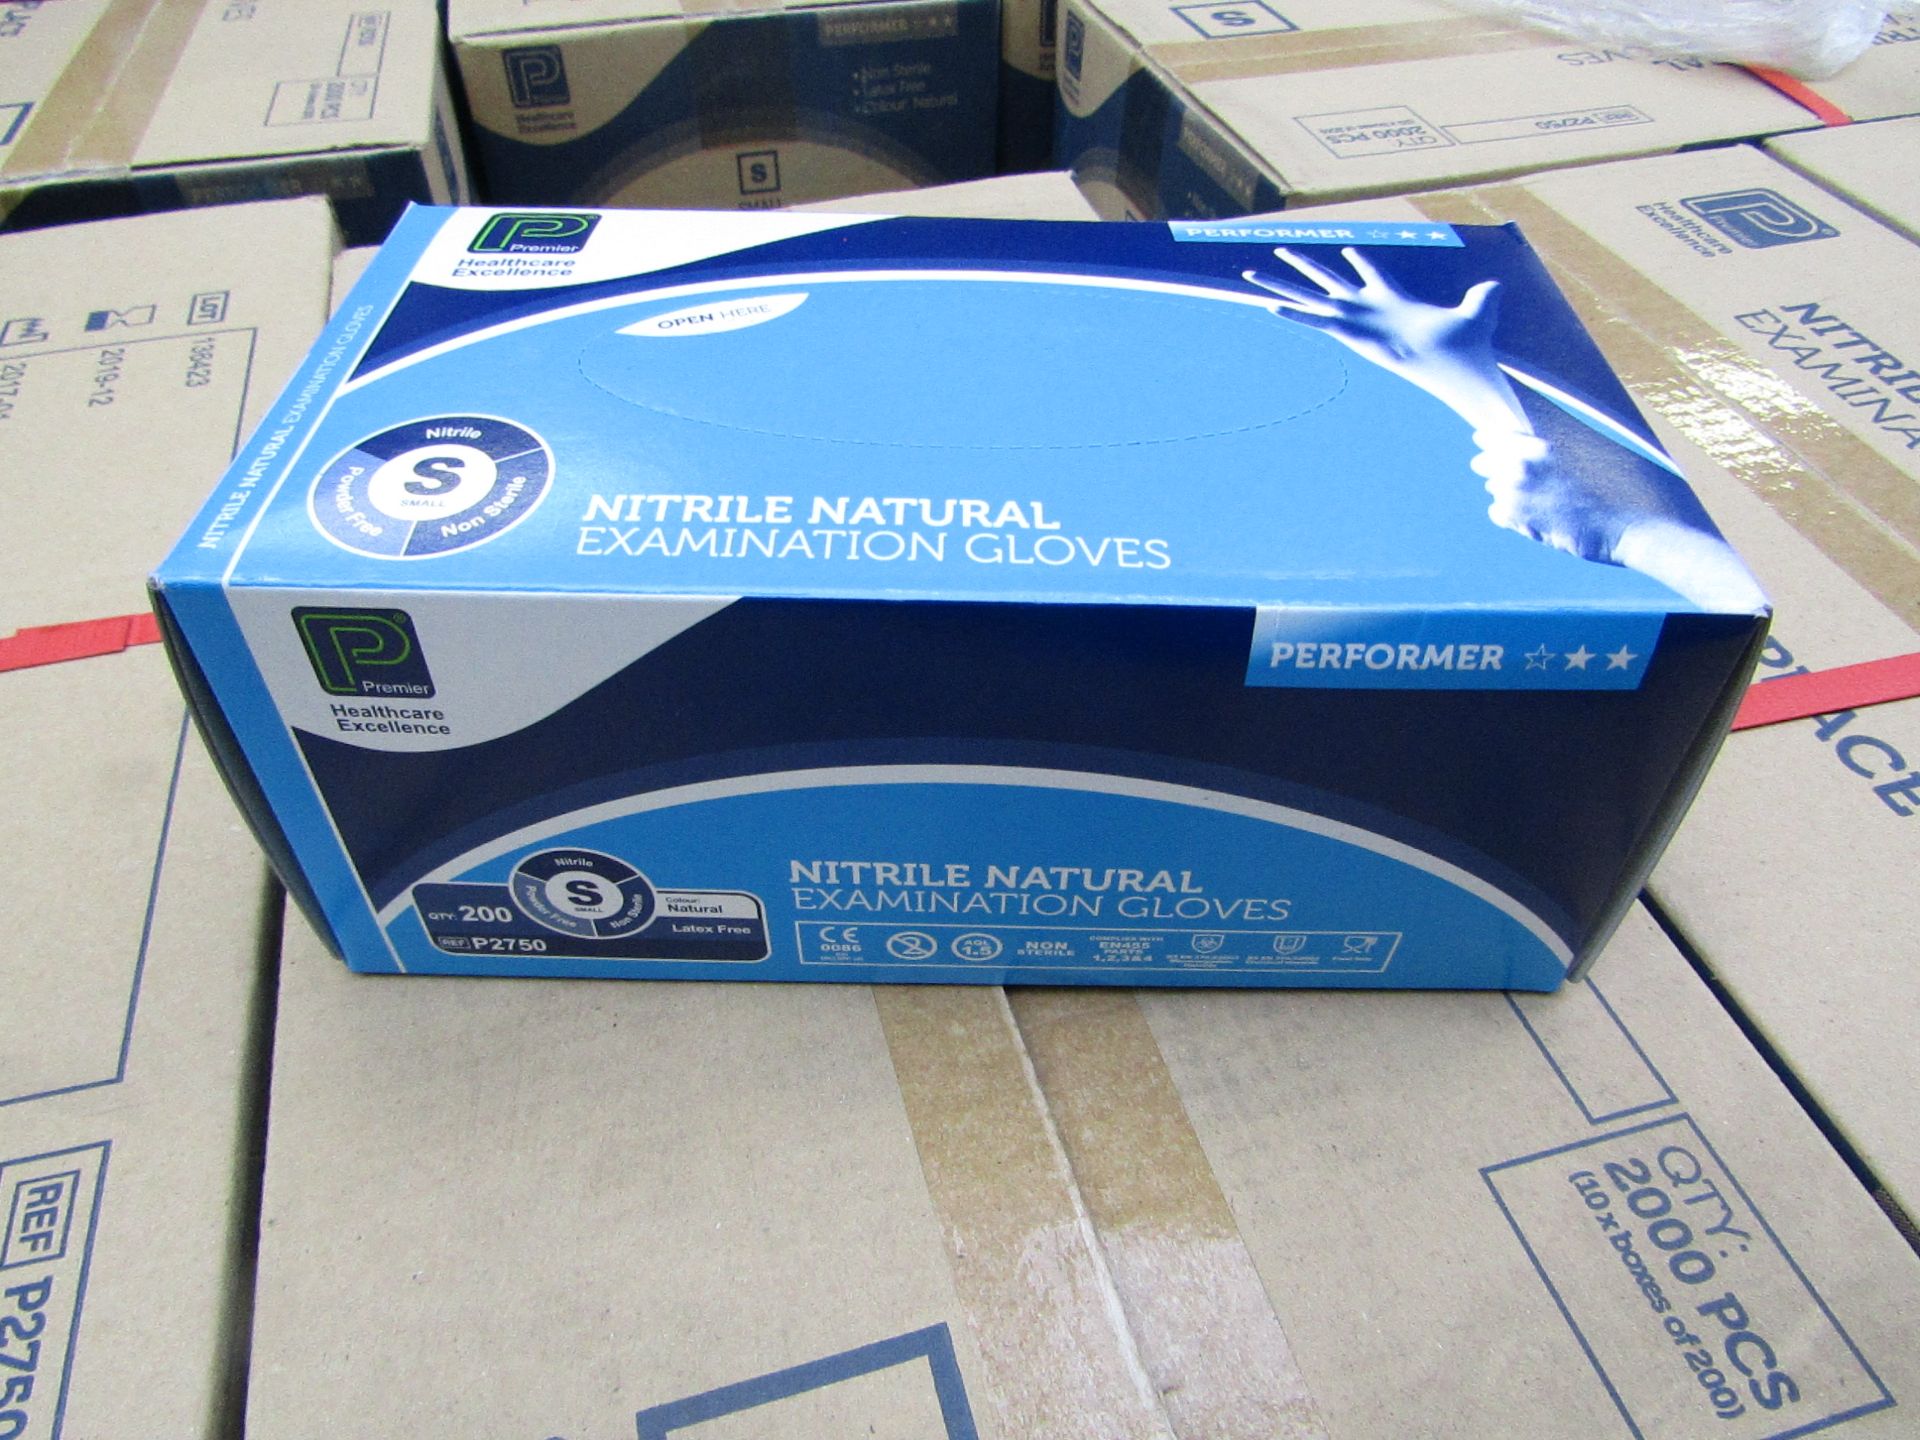 Box of 2000 Nitrile Examination Gloves, new size small